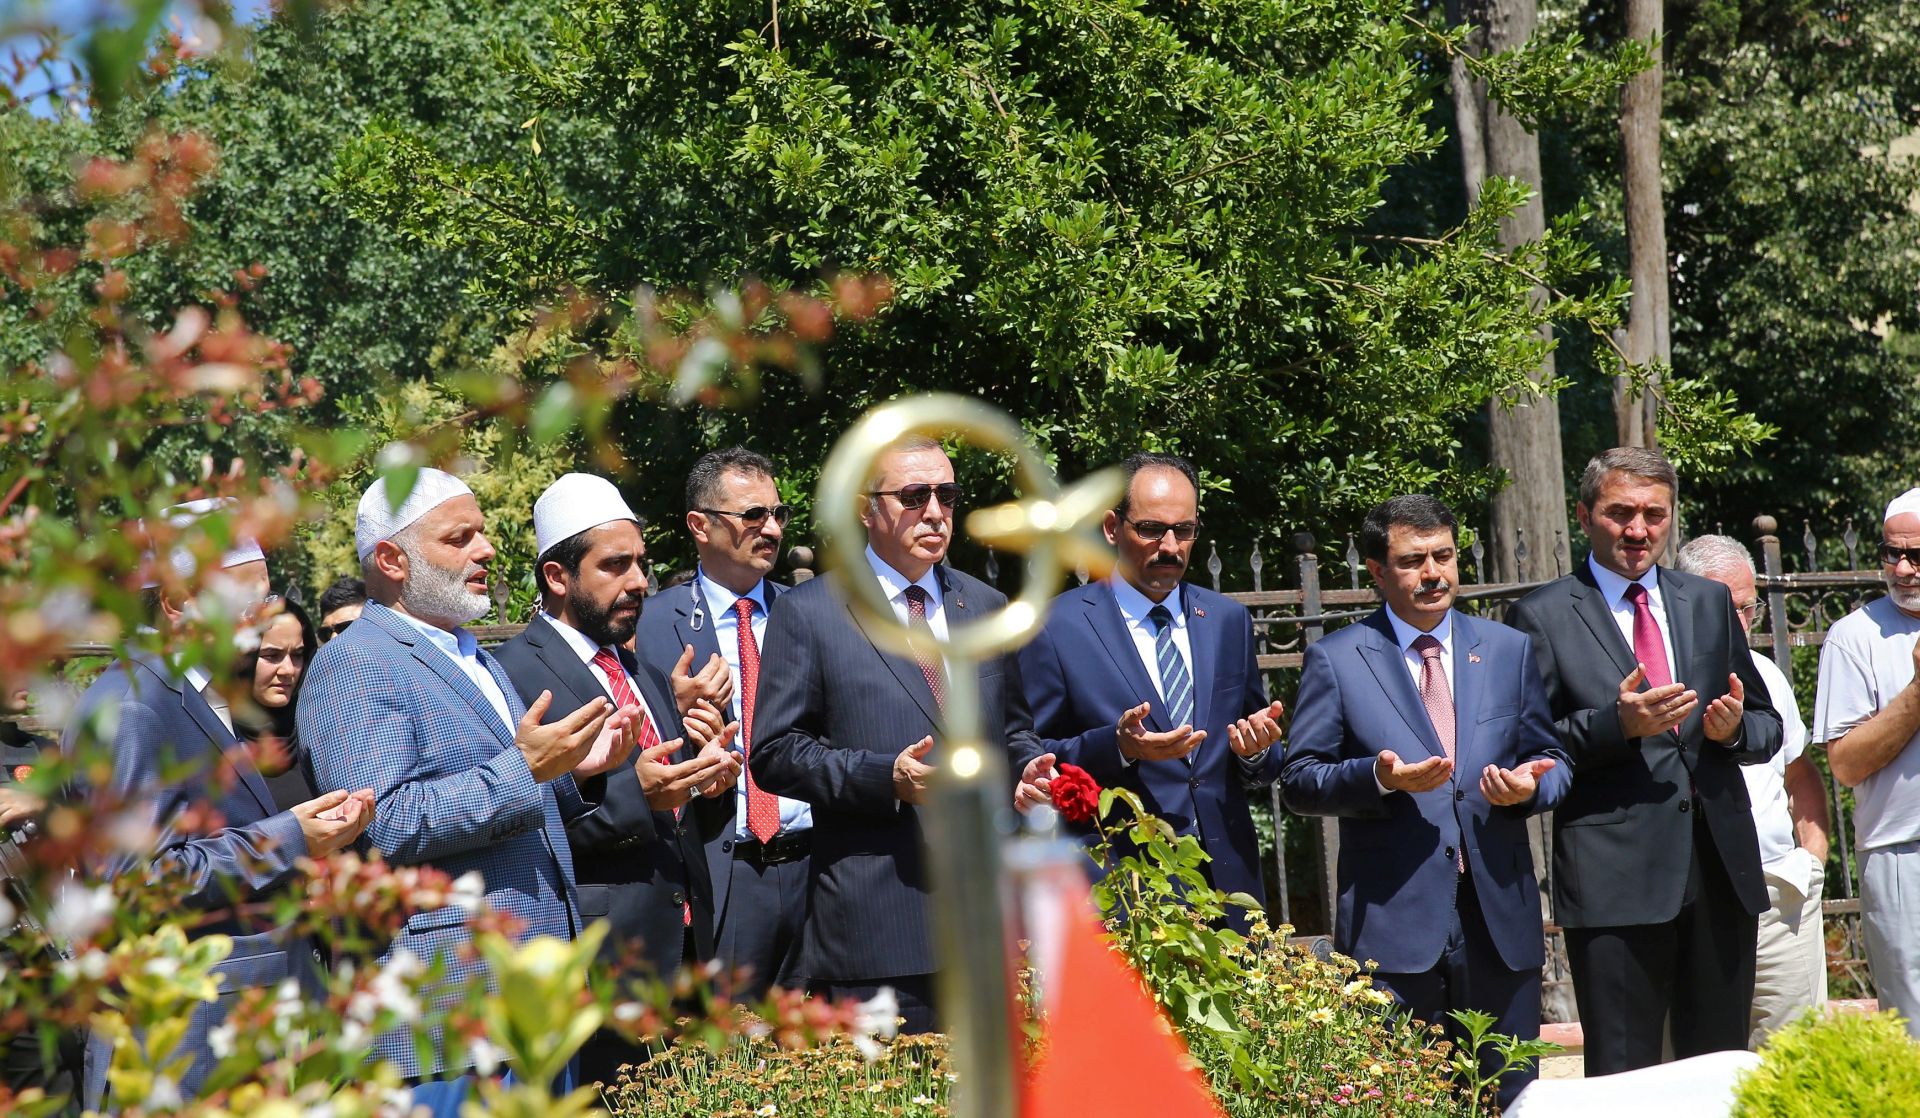 epa06081710 A handout photo made available by the Turkish President Press office shows, Turkish President Recep Tayyip Erdogan (C) visiting the graves of people killed during the 15 July 2016 coup attempt, in Istanbul, Turkey, 11 July 2017. The 15 July 2017 event marks the first anniversary of the failed coup attempt which led to some 50,000 workers being dismissed, some 8,000 people arrested, and scores of news outlets shut down by the government. Turkish President Recep Tayyip Erdogan blamed US-based Turkish cleric Fetullah Gulen and his movement for masterminding the failed coup and Turkey remains under a state of emergency as a result.  EPA/HANDOUT  HANDOUT EDITORIAL USE ONLY/NO SALES